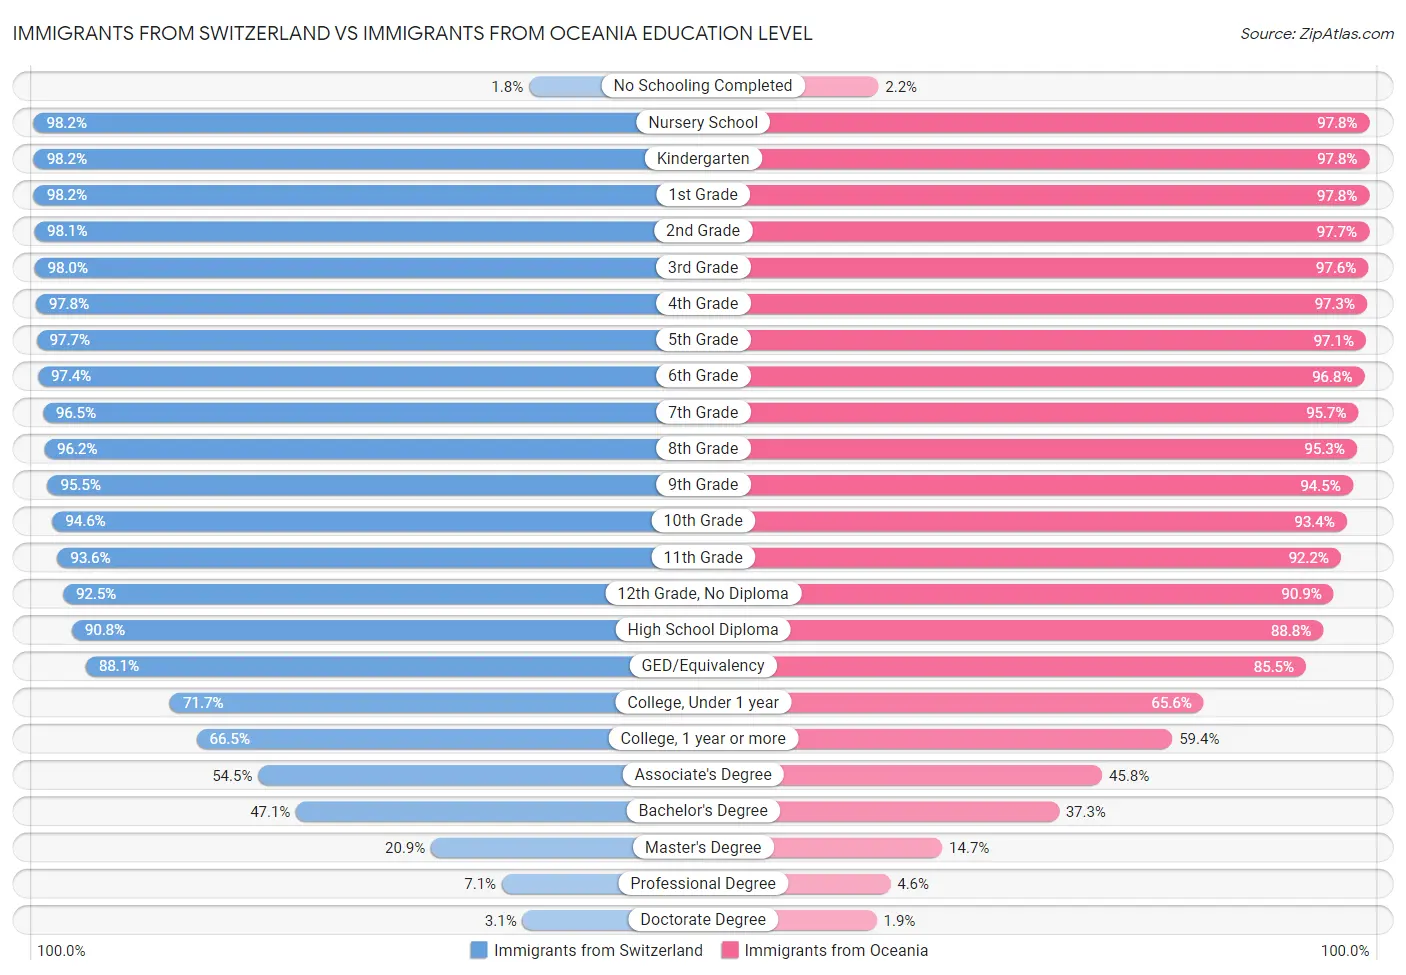 Immigrants from Switzerland vs Immigrants from Oceania Education Level